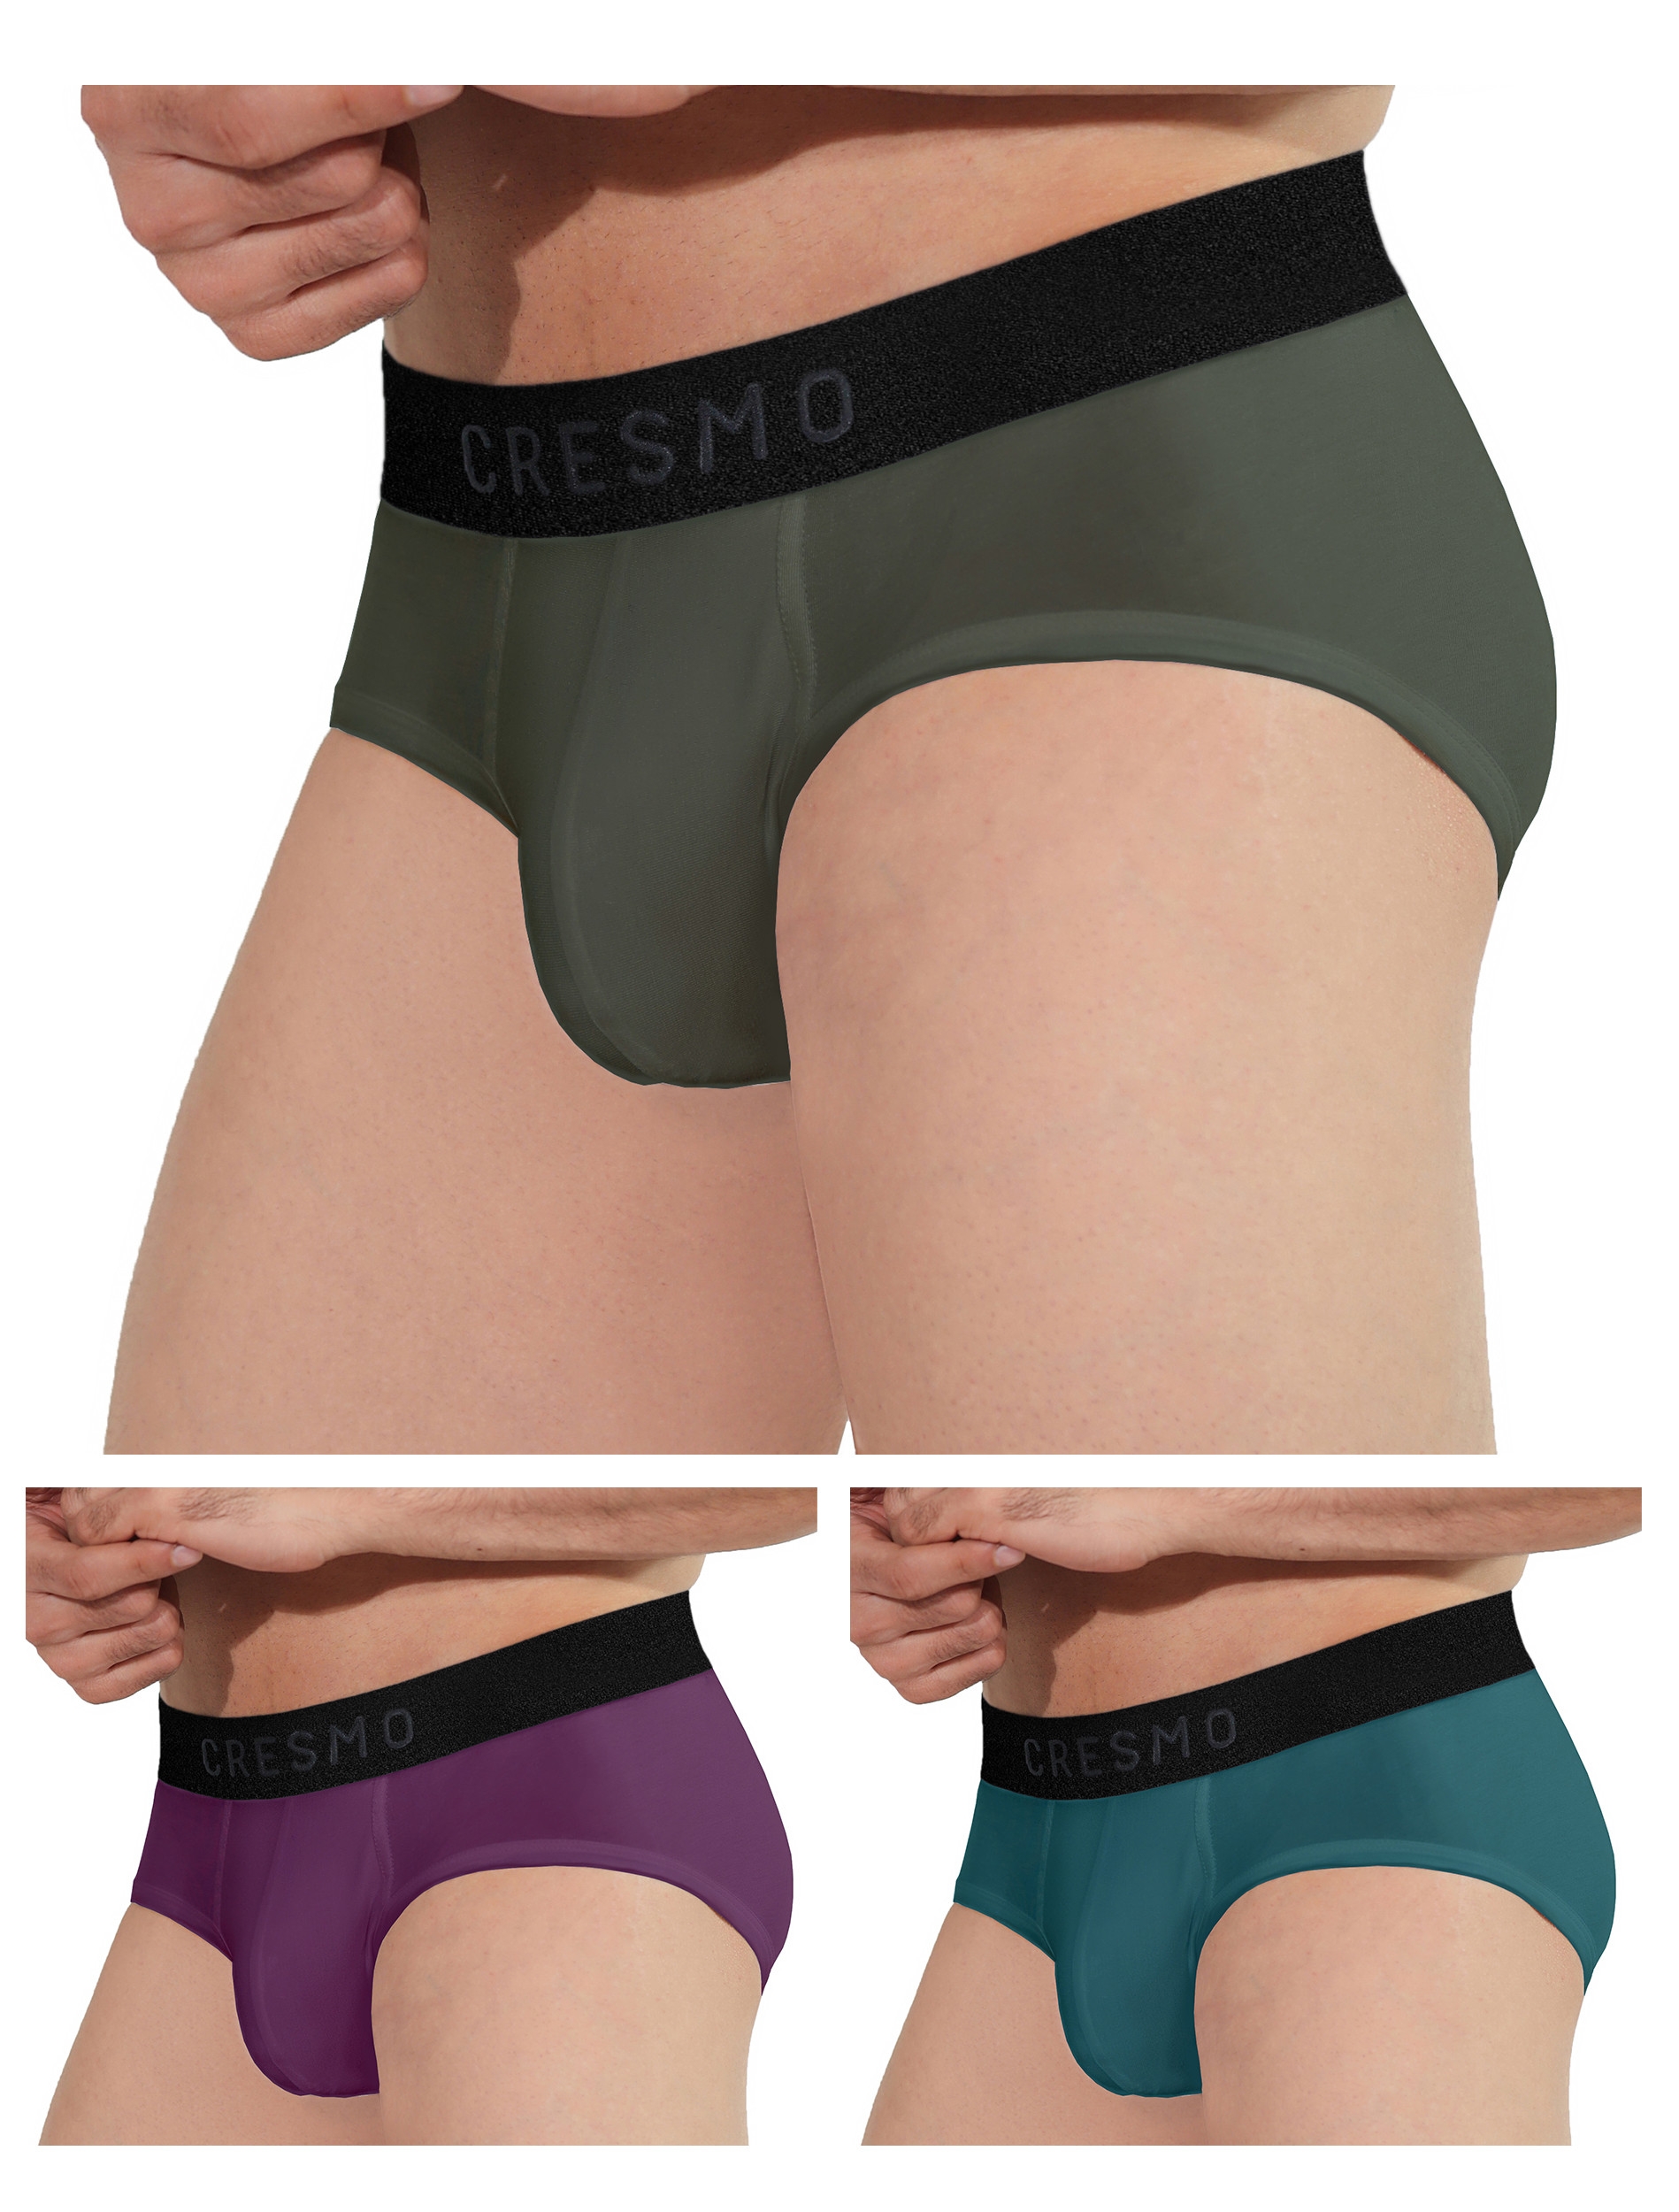 CRESMO | CRESMO Men's Luxury Microbial Micro Modal Underwear Breathable Ultra Soft Comfort Lightweight Brief